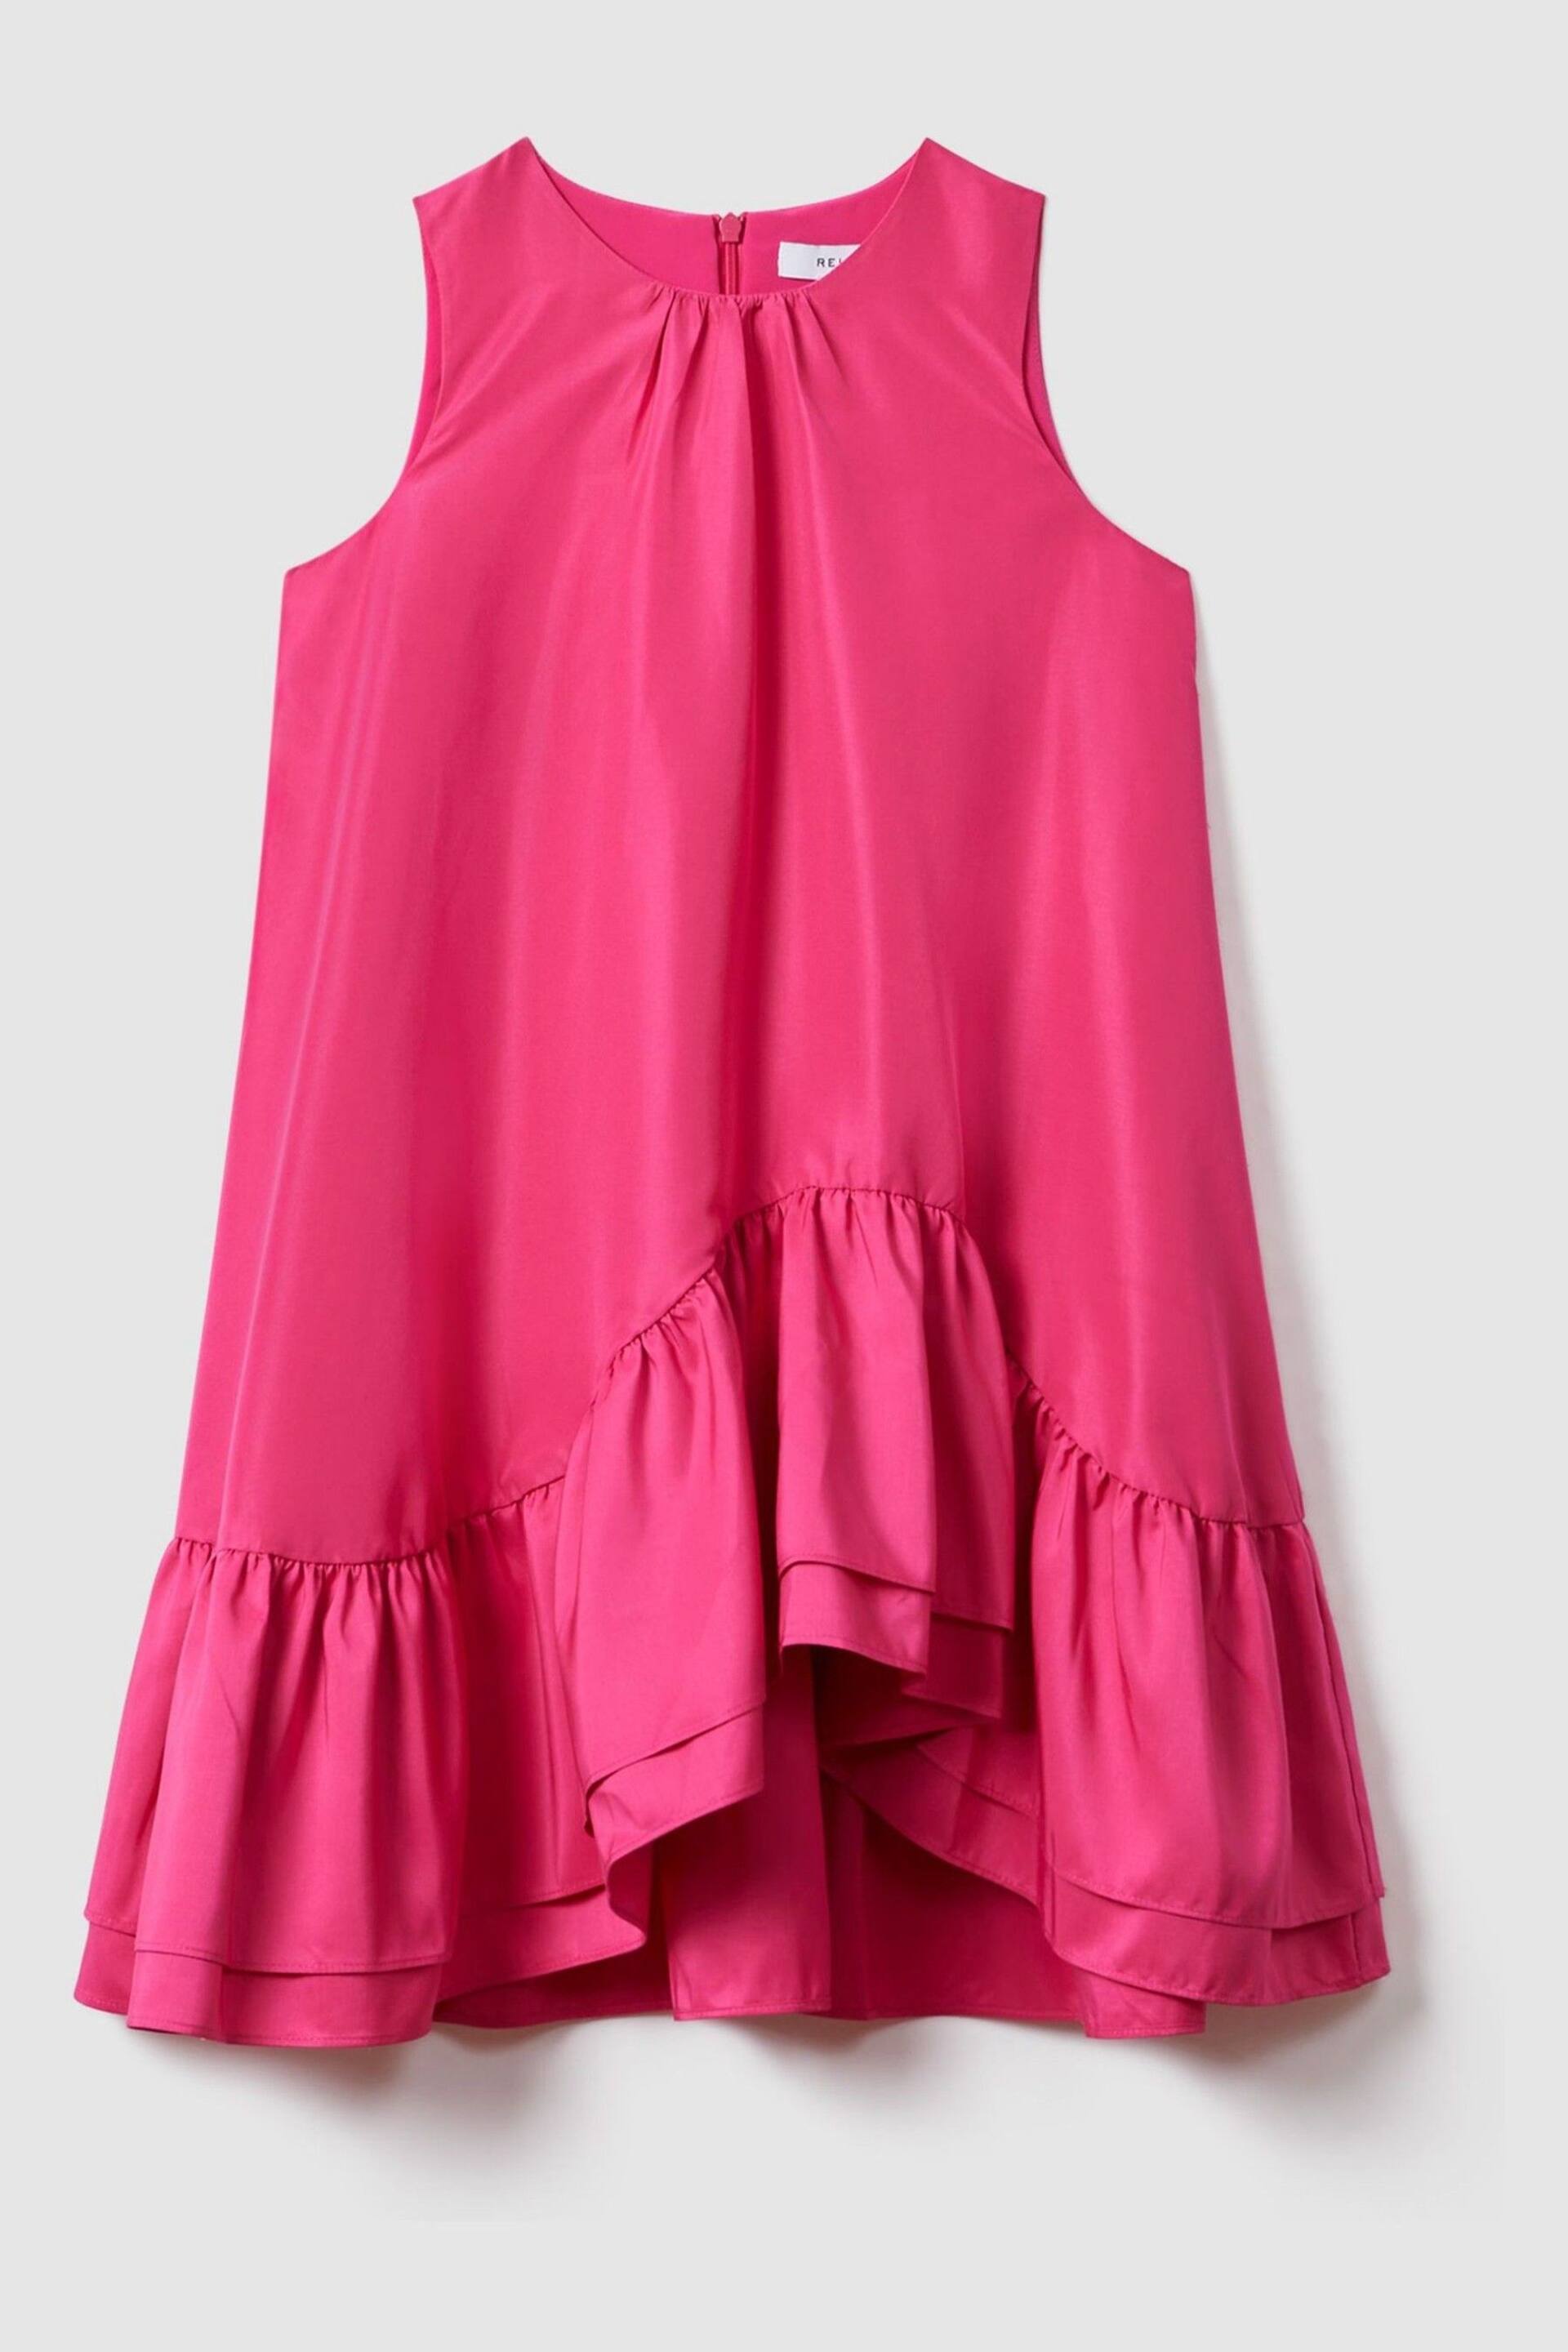 Reiss Bright Pink Cherie Junior Layered High-Low Dress - Image 2 of 7